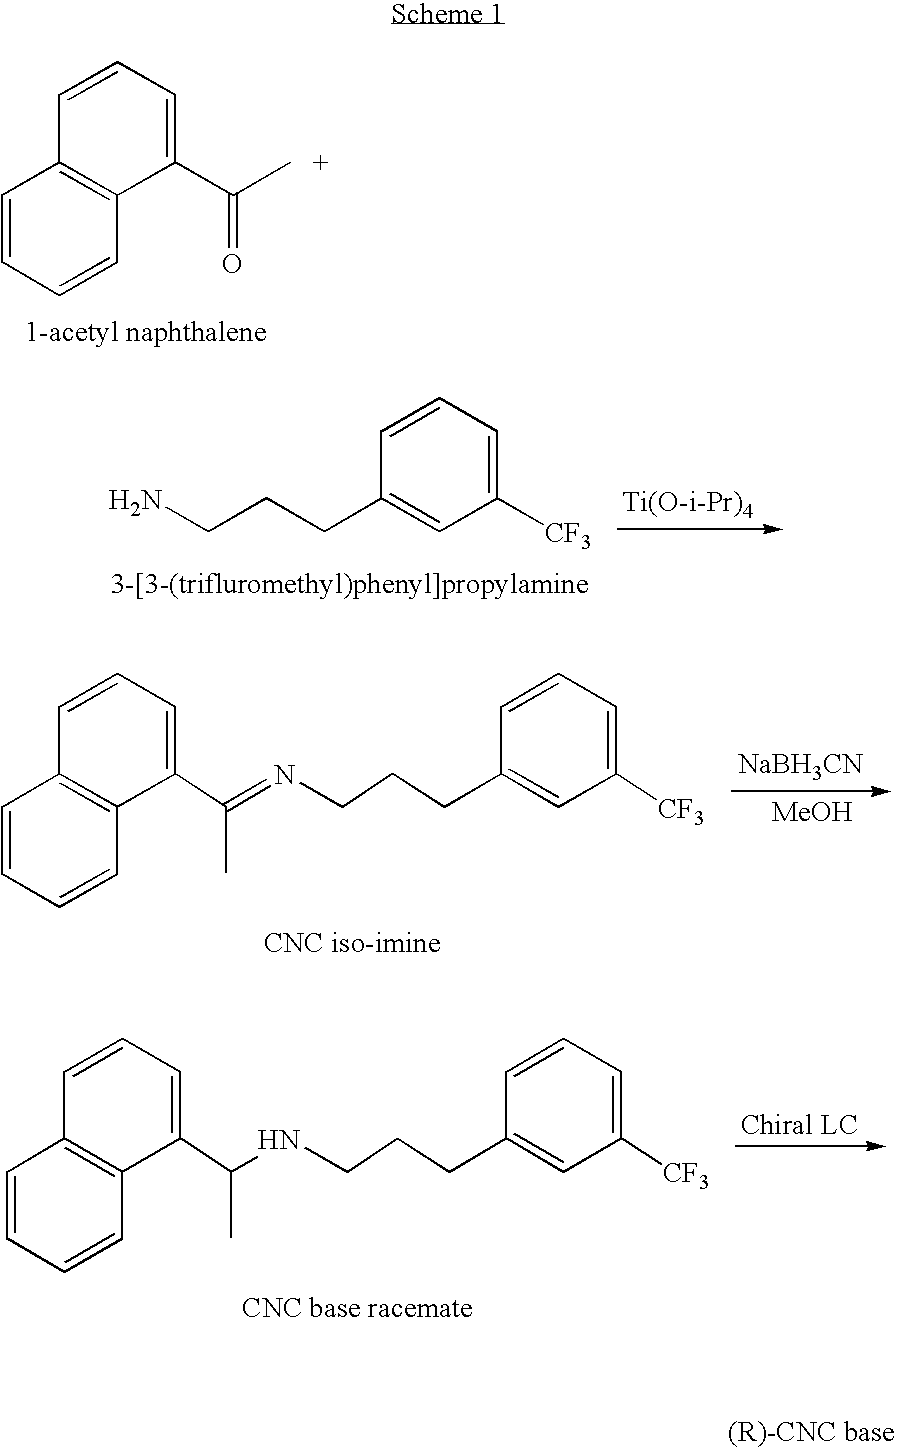 Process for preparing Cinacalcet hydrochloride